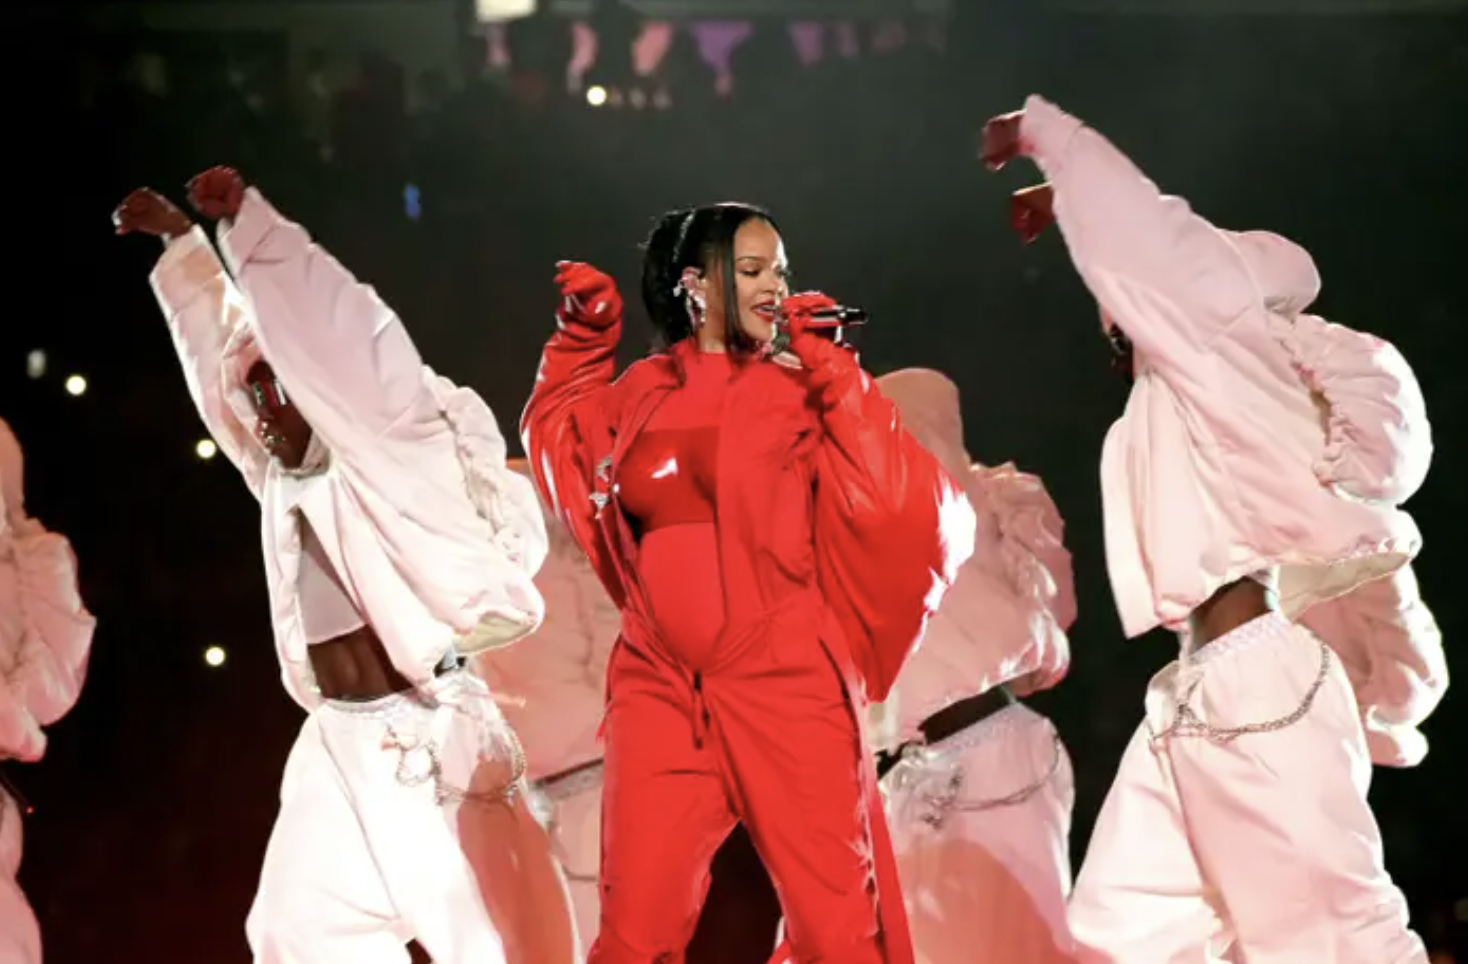 rihanna glowing onstage at the super bowl surrounded by back up dancers in white